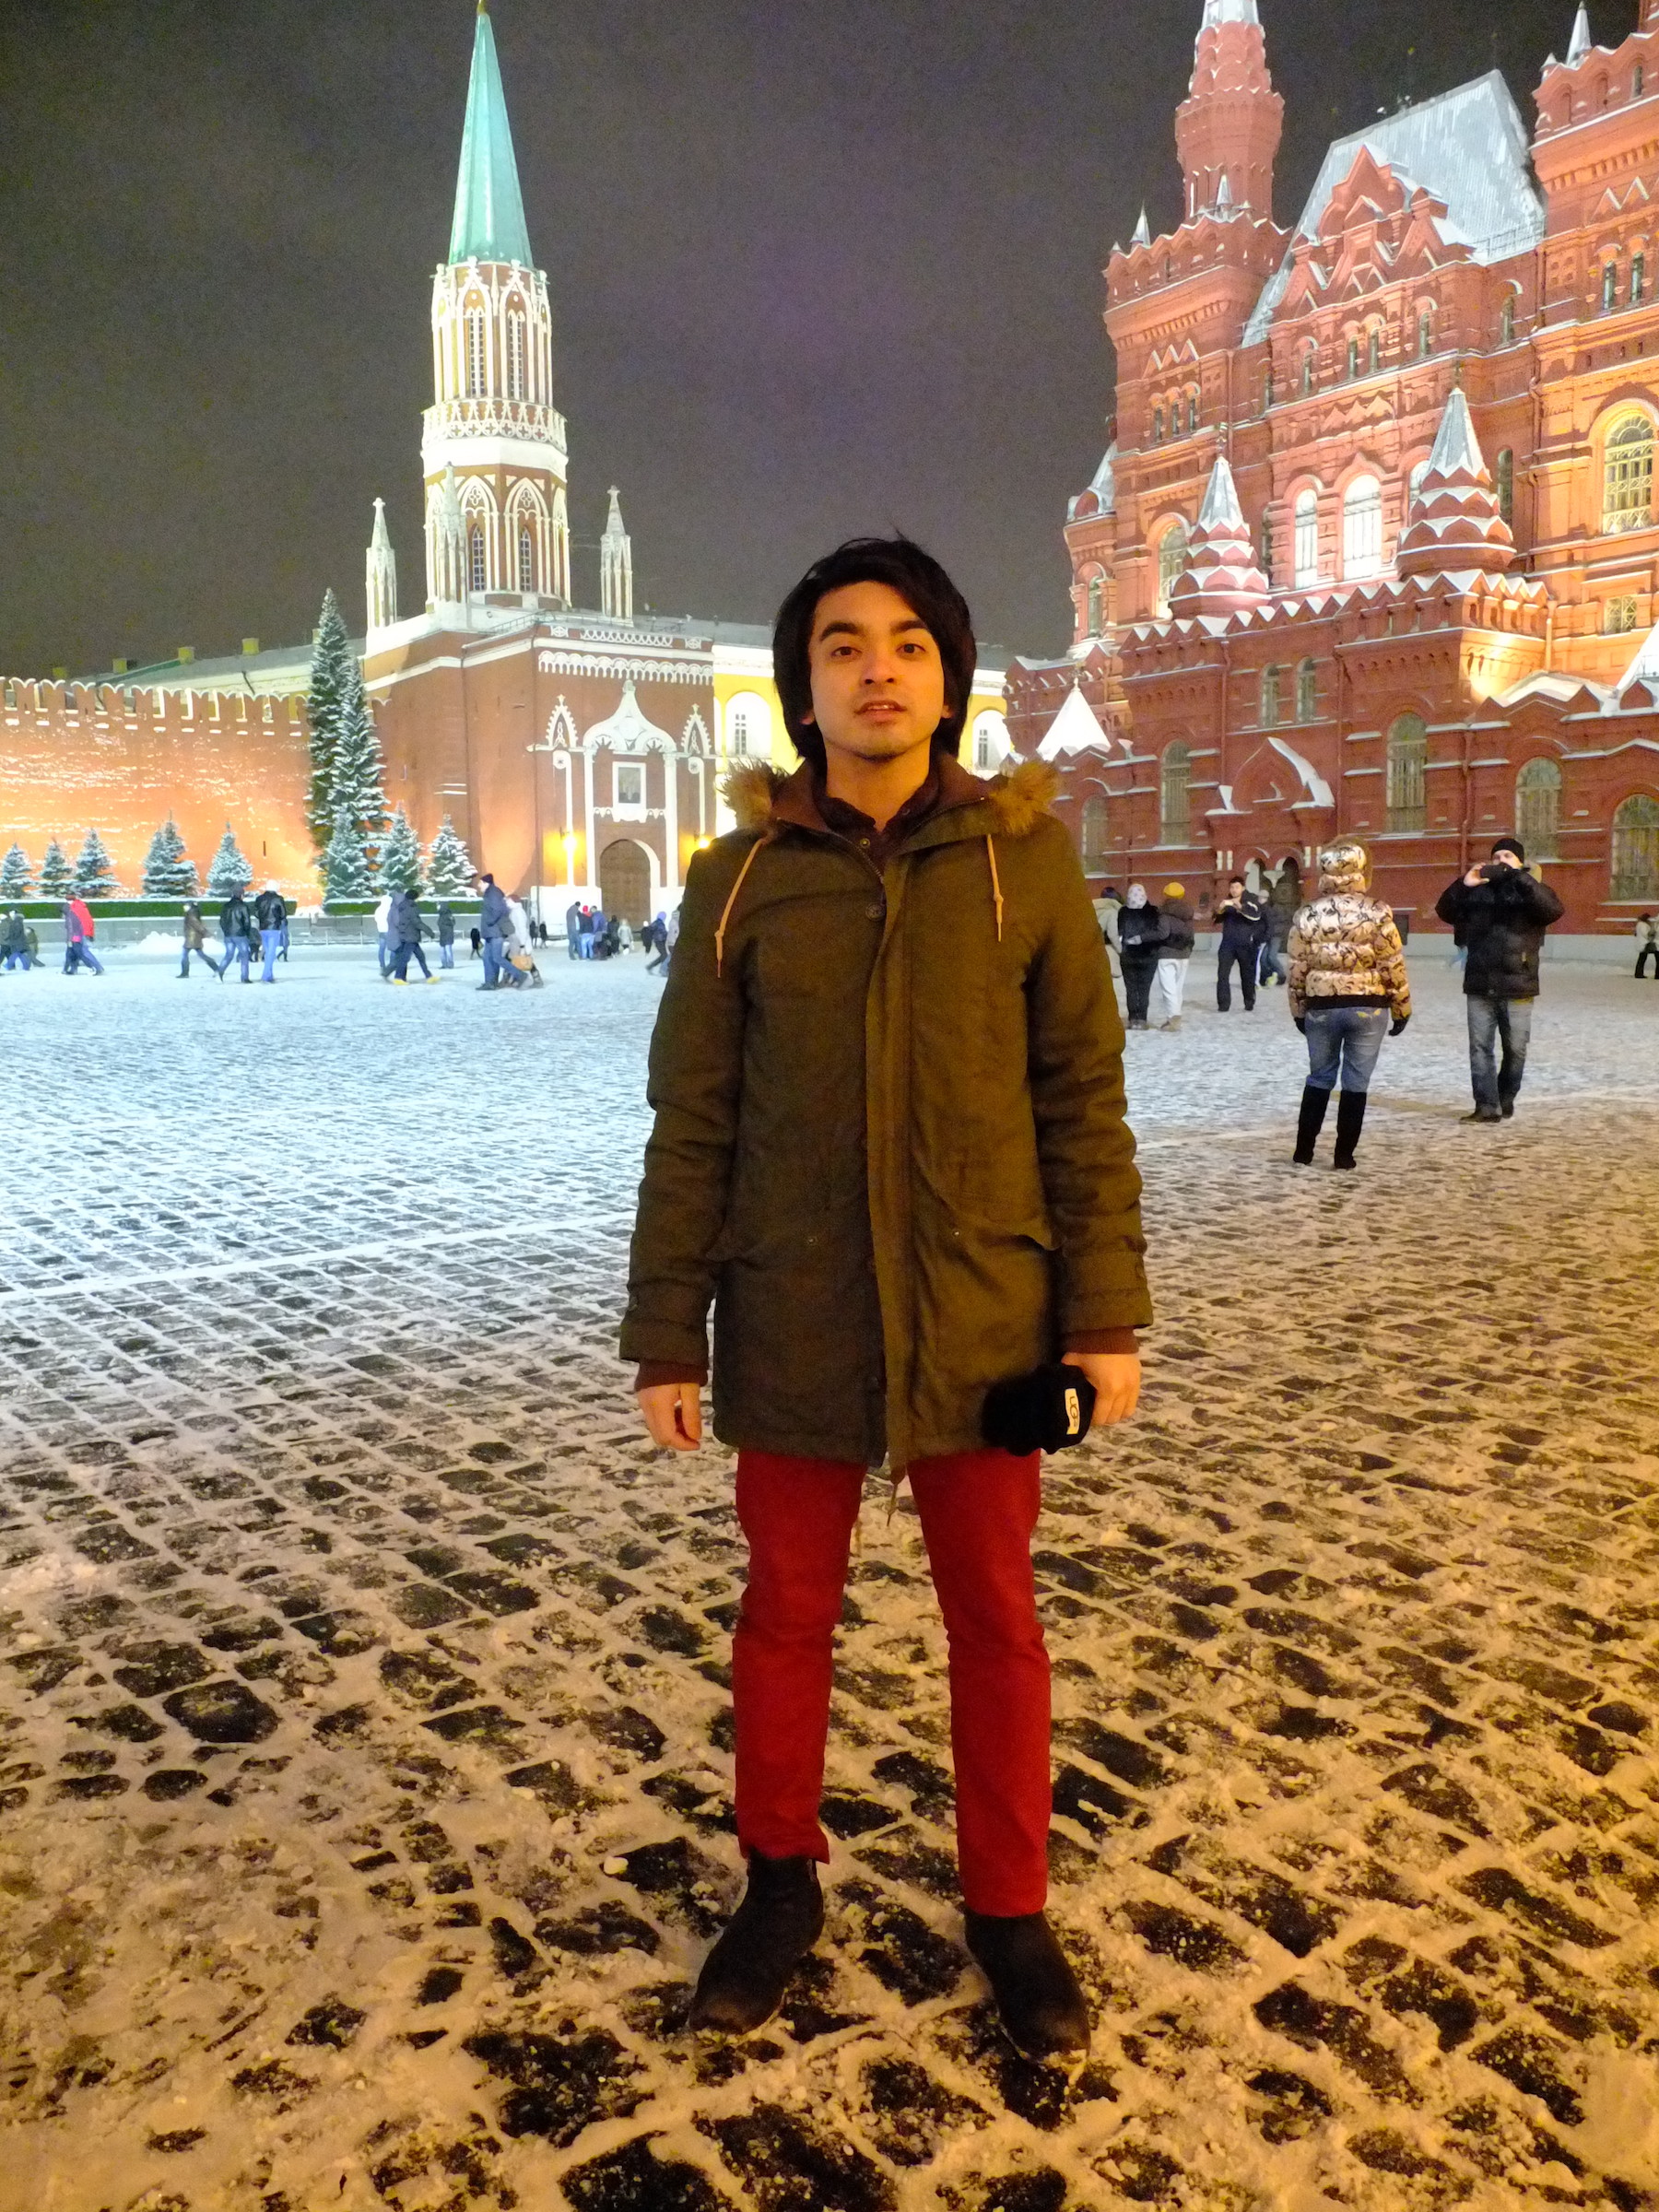 Red Square on a winter's night